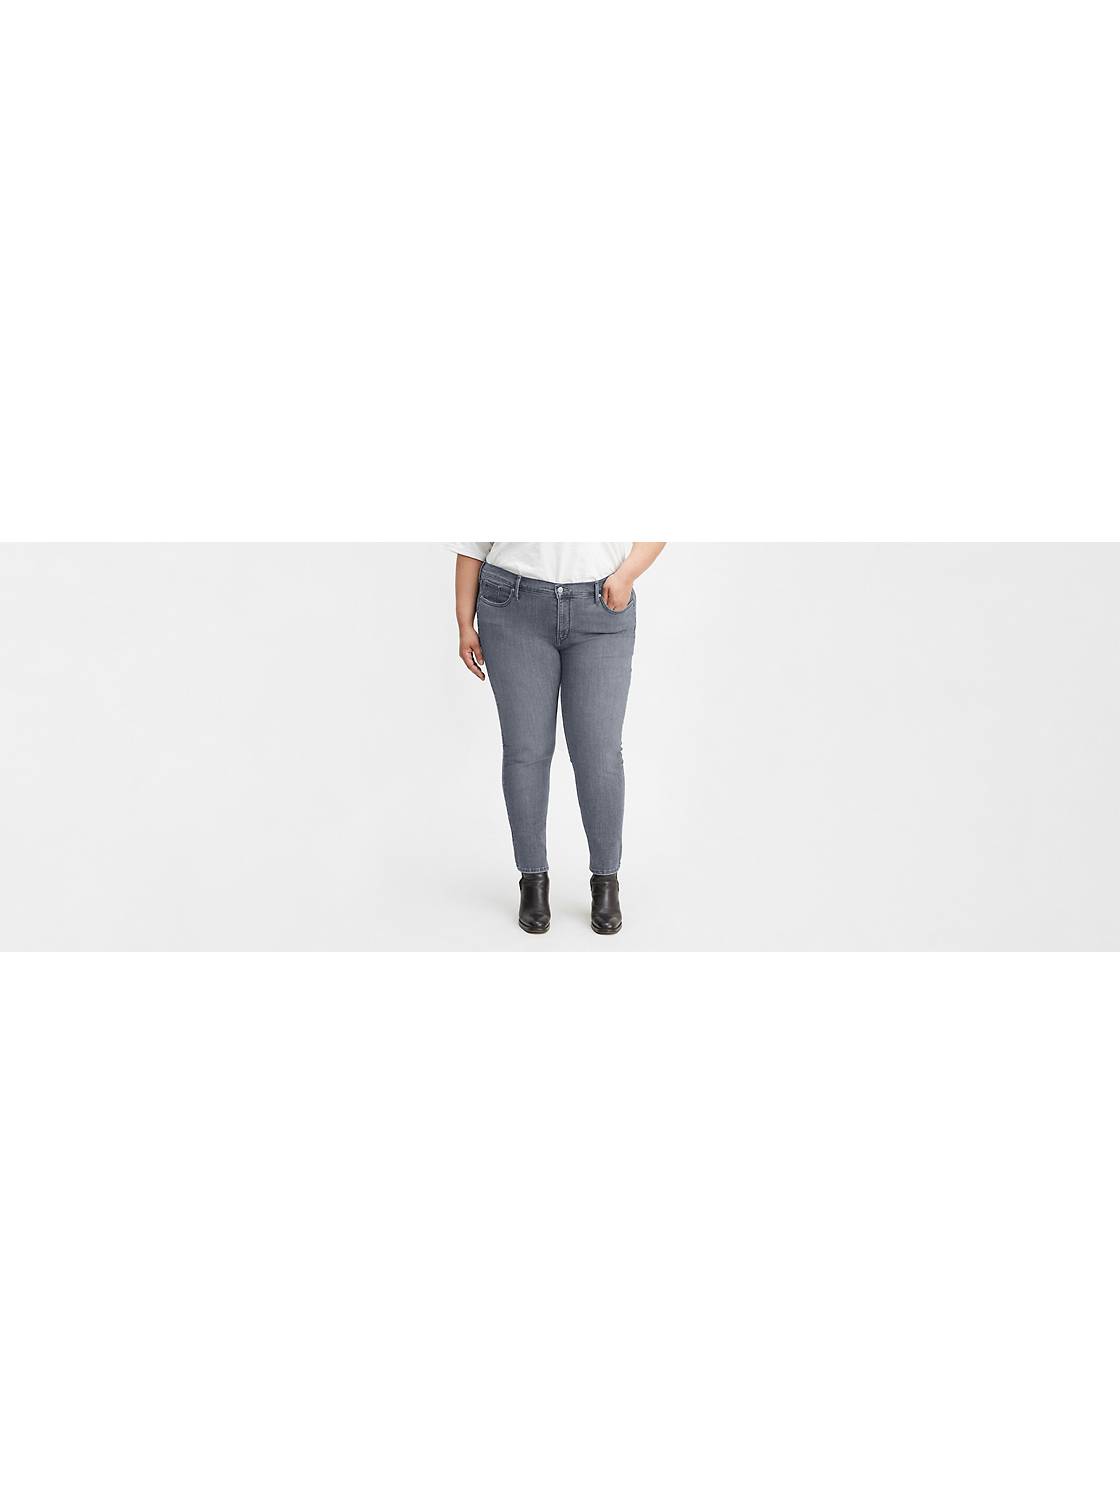 High * Washed Grey Skinny Jeans, Cropped Stretchy Tight Fit High Waist  Denim Pants, Women's Denim Jeans & Clothing